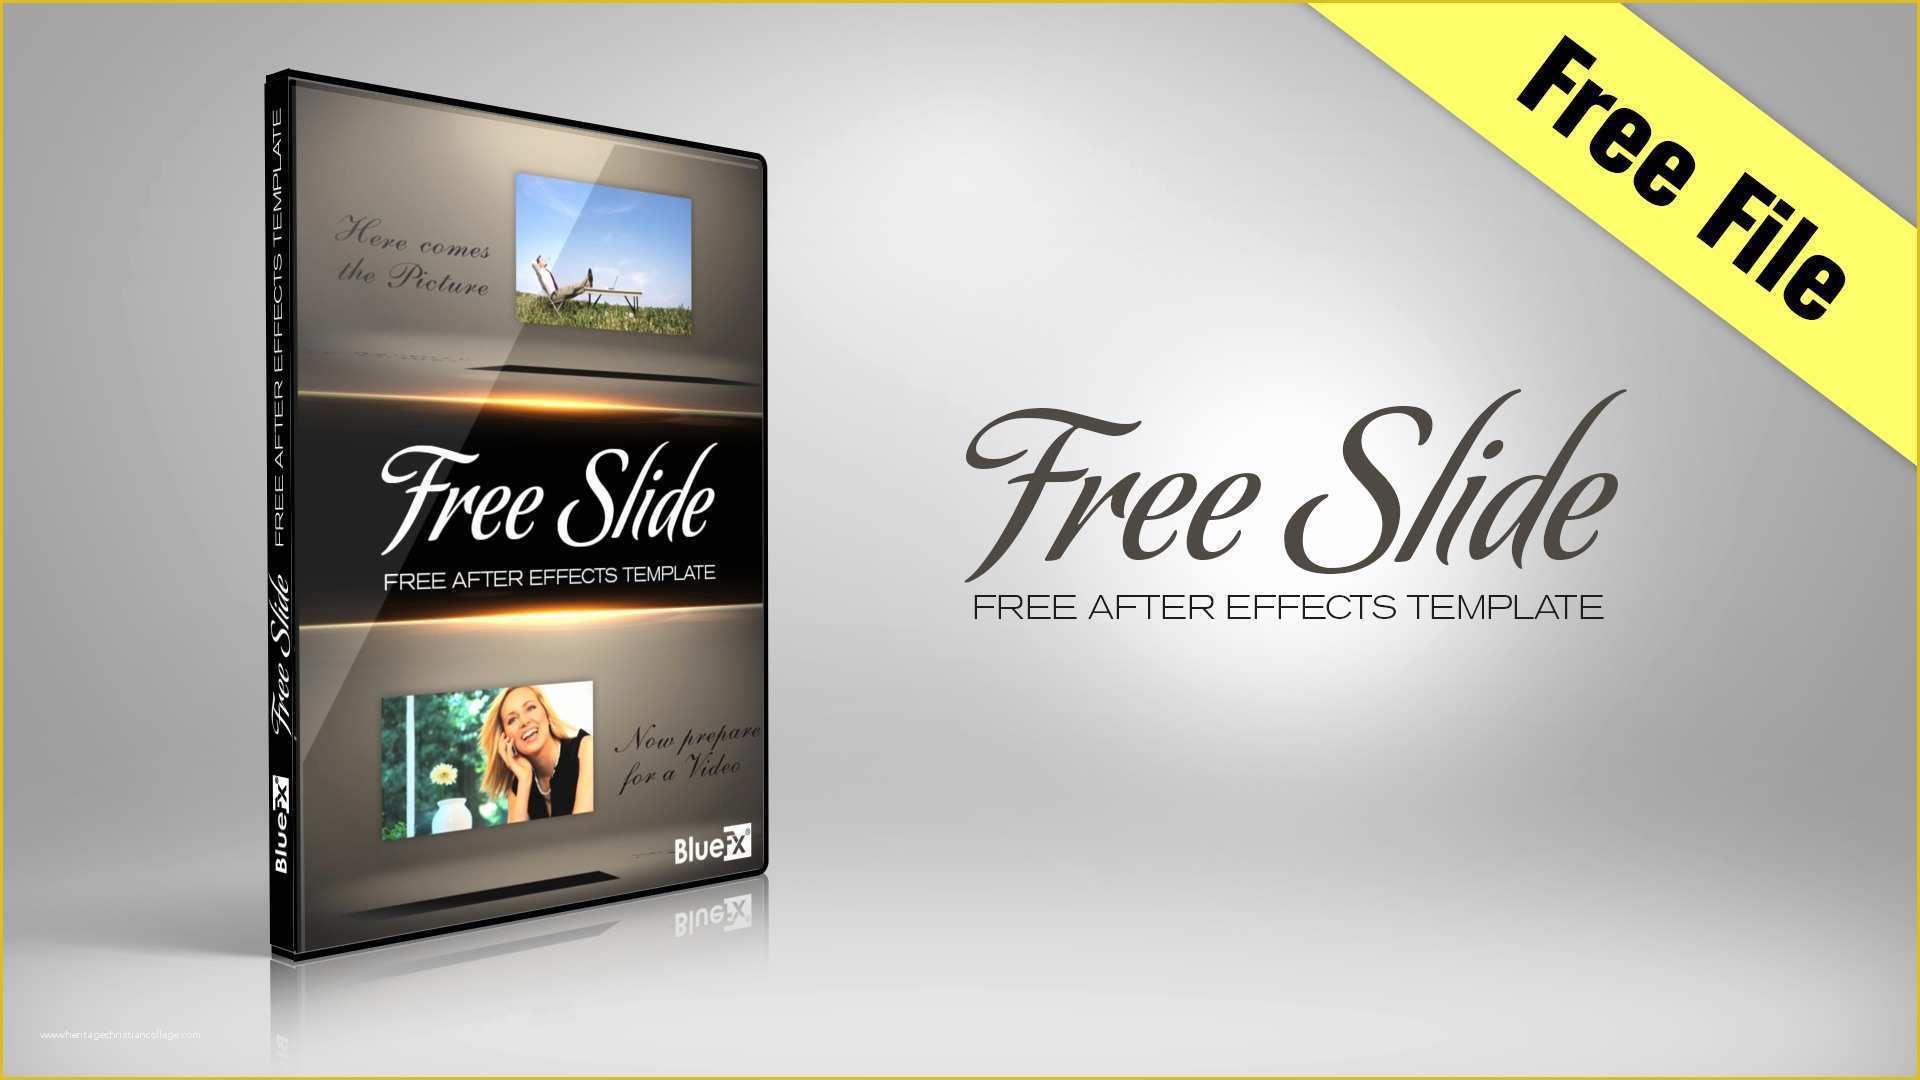 Adobe after Effects Photo Slideshow Template Free Download Of after Effects Slideshow Template Free